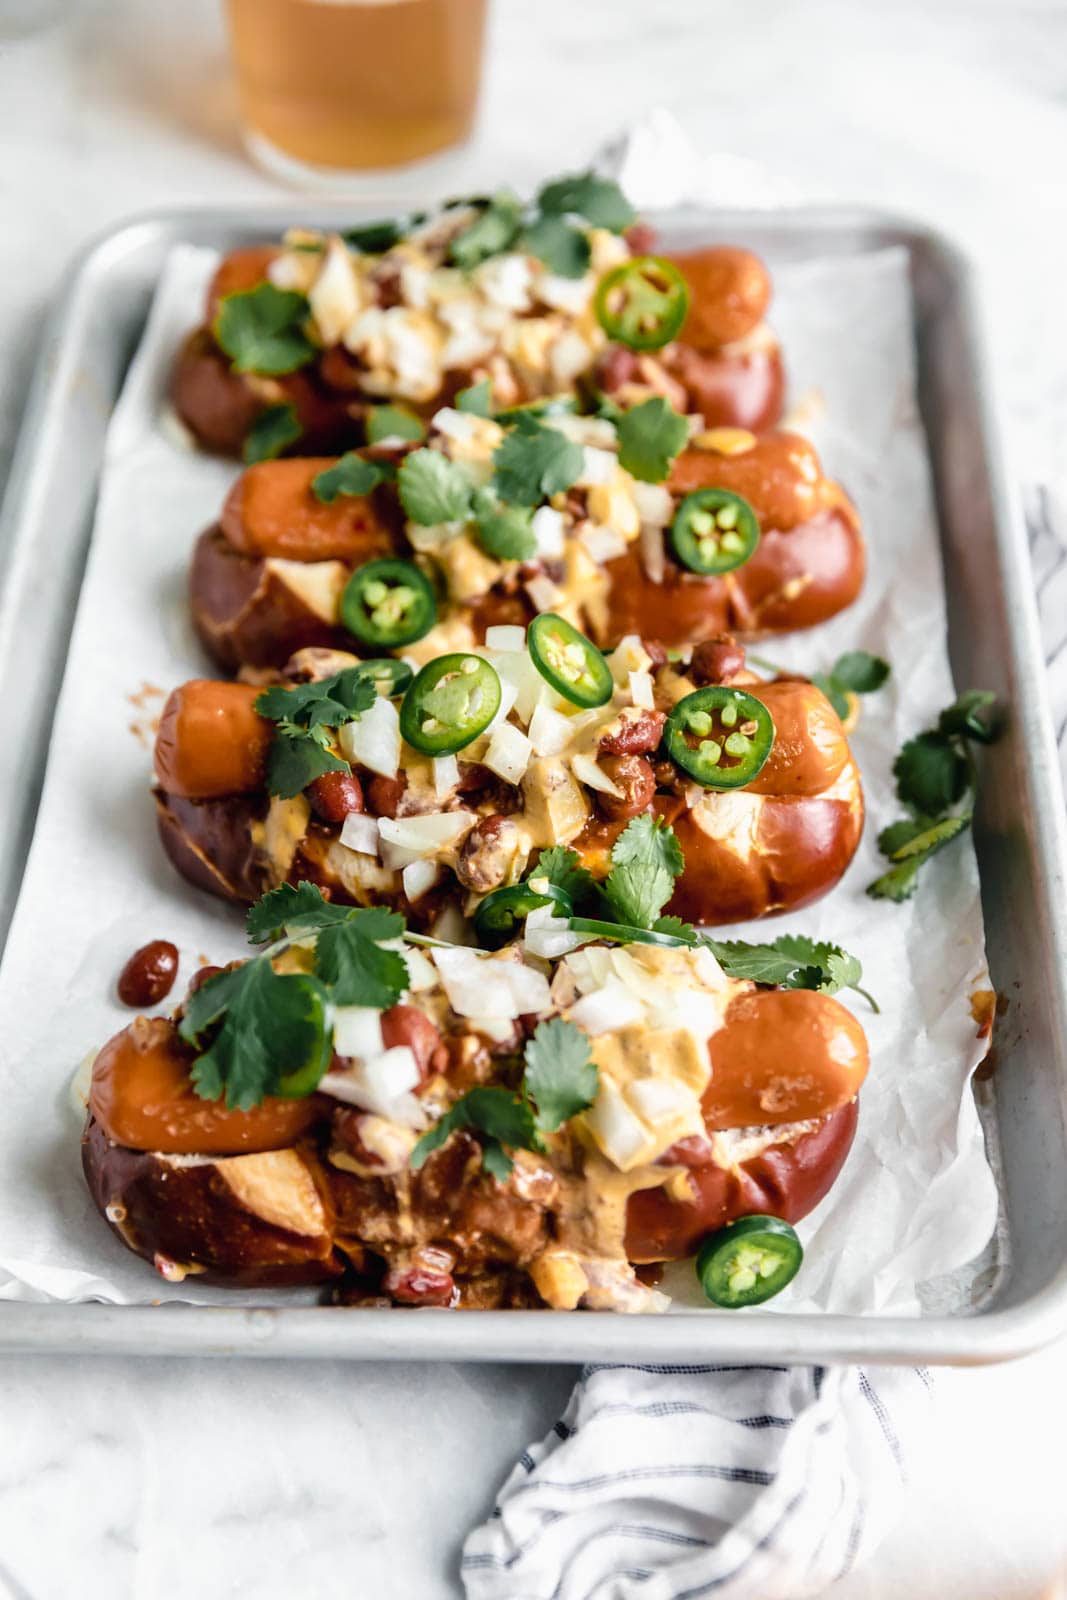 Vegan Chili Cheese Dogs with a creamy cashew queso so good even the most discerning meat-eaters will be impressed.